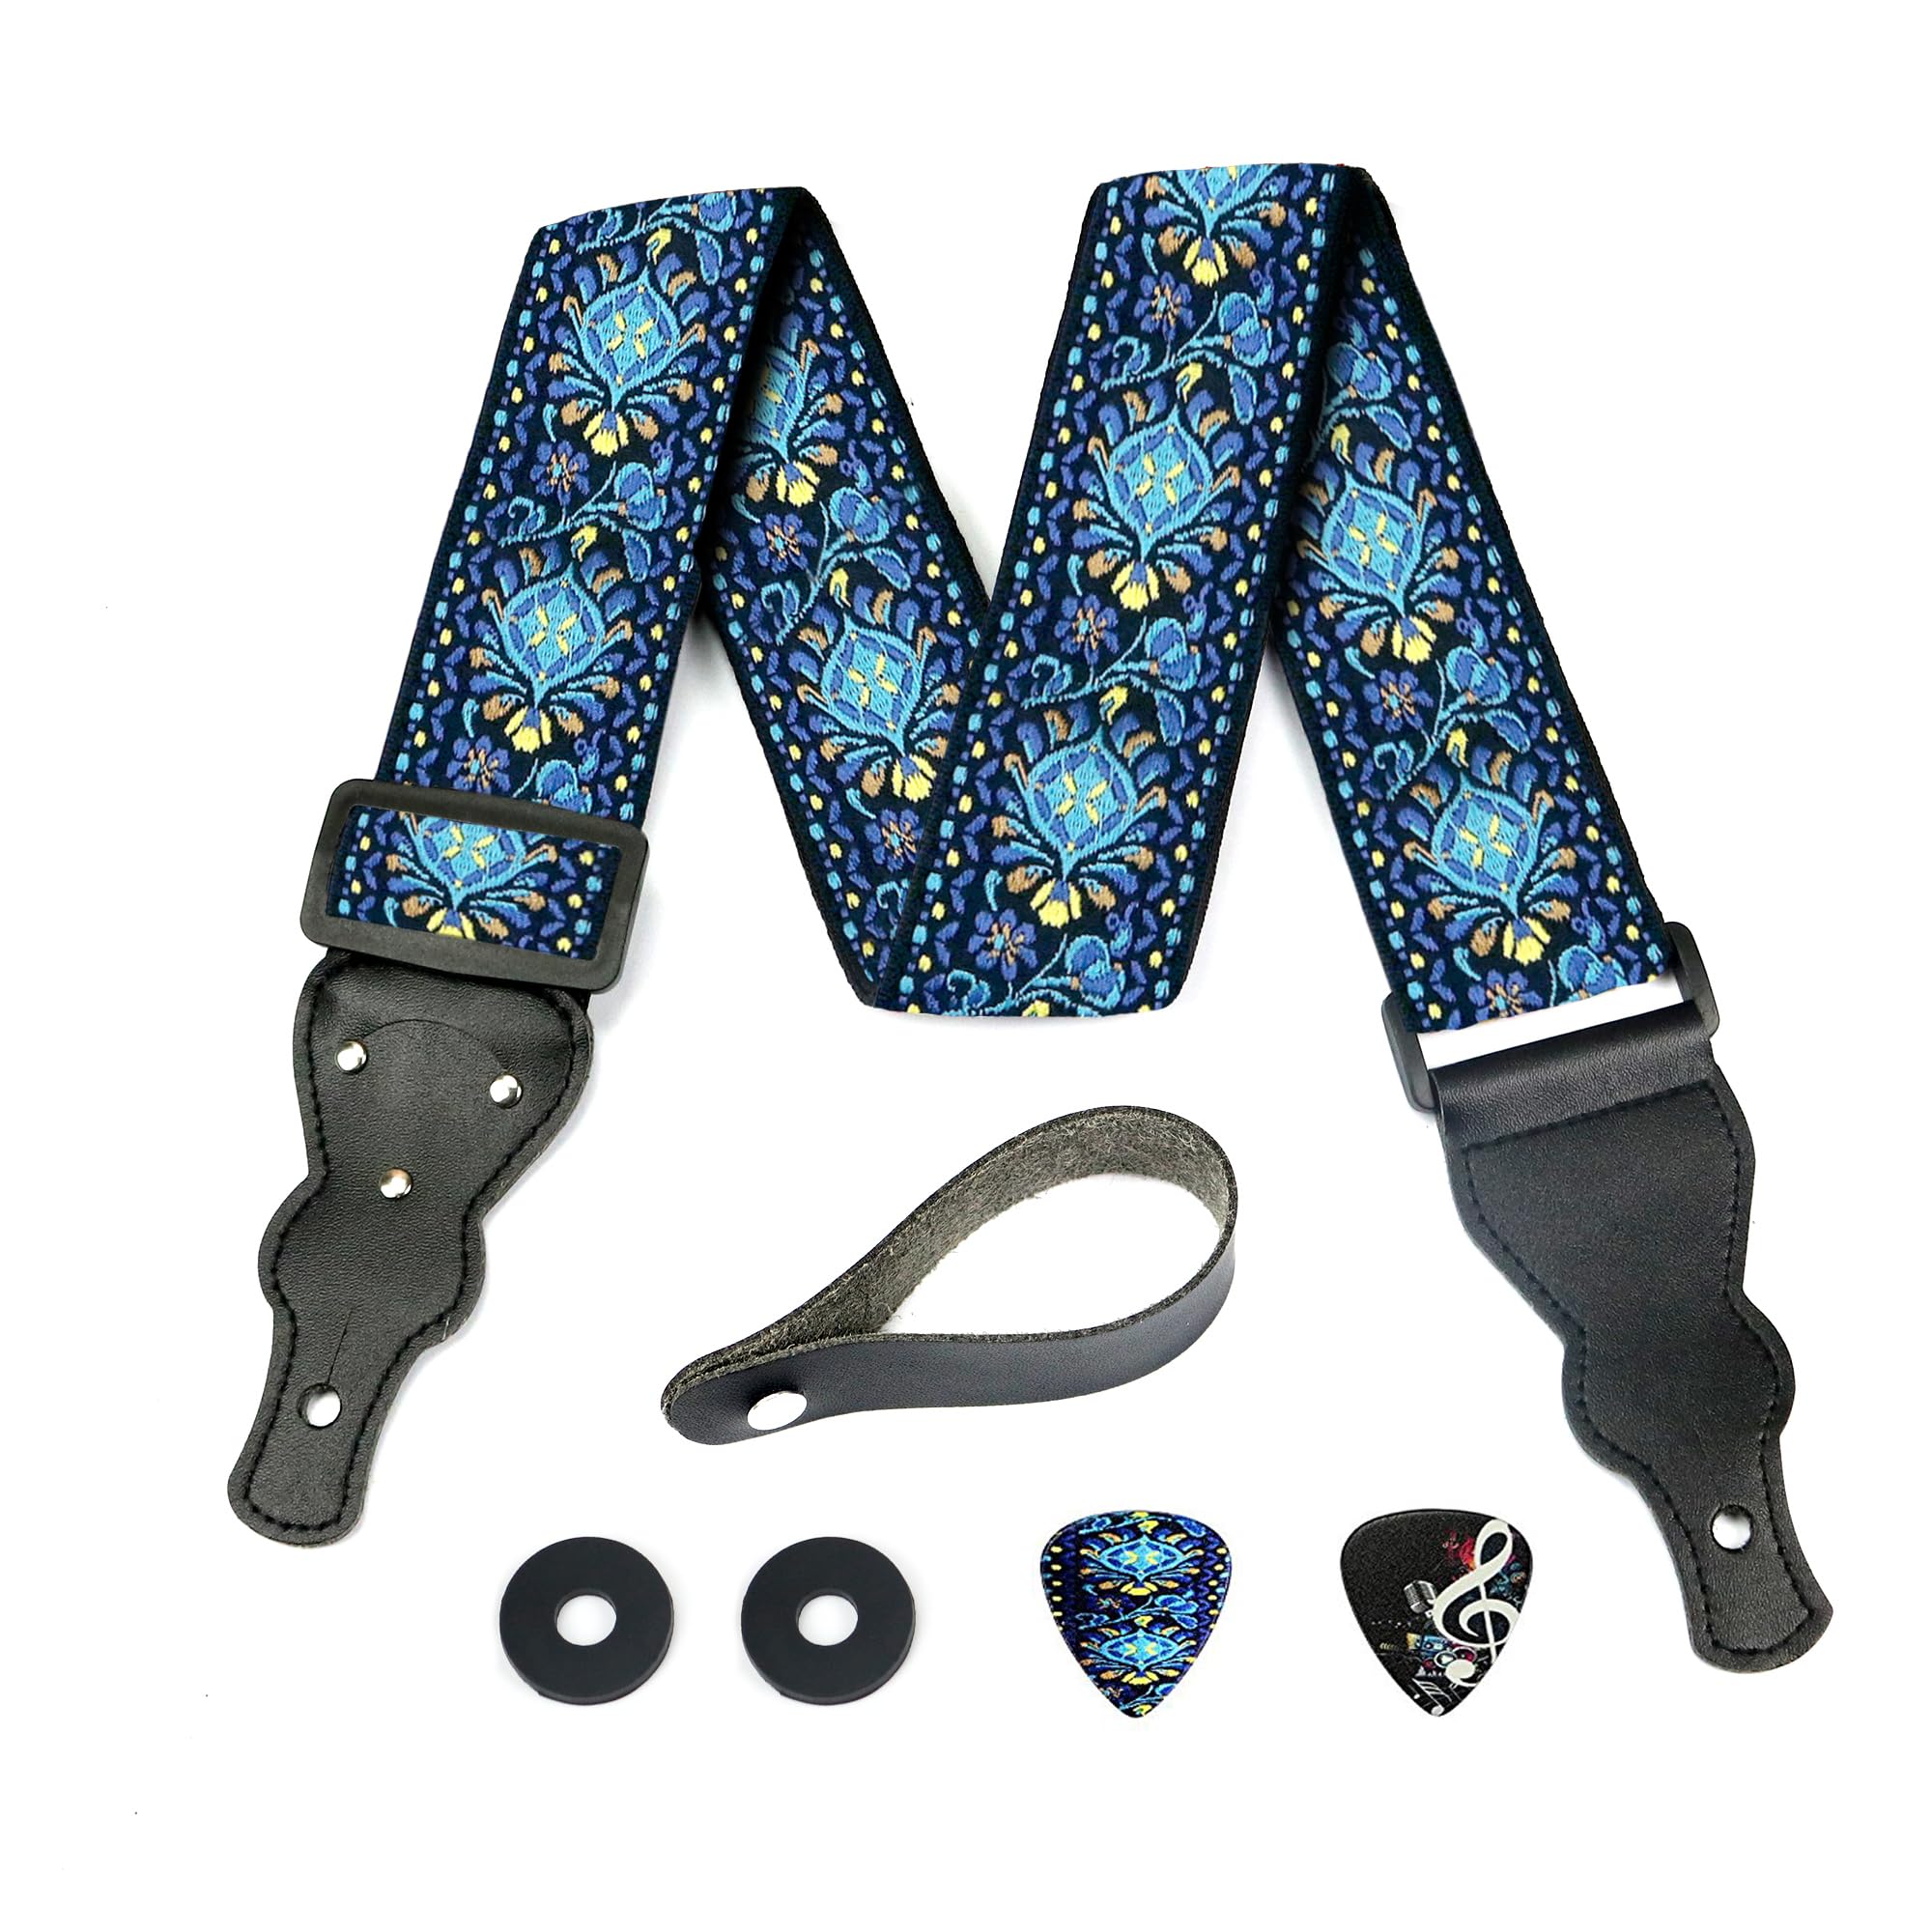 Book Cover Hootenanny Guitar Strap, Jacquard Weave Embroidered Christmas Gift Strap Includes 2 Strap Locks & 2 Unique Picks. Adjustable Pick Pocket For Bass, Electric & Acoustic Guitar Stocking Stuffer Blue Woven